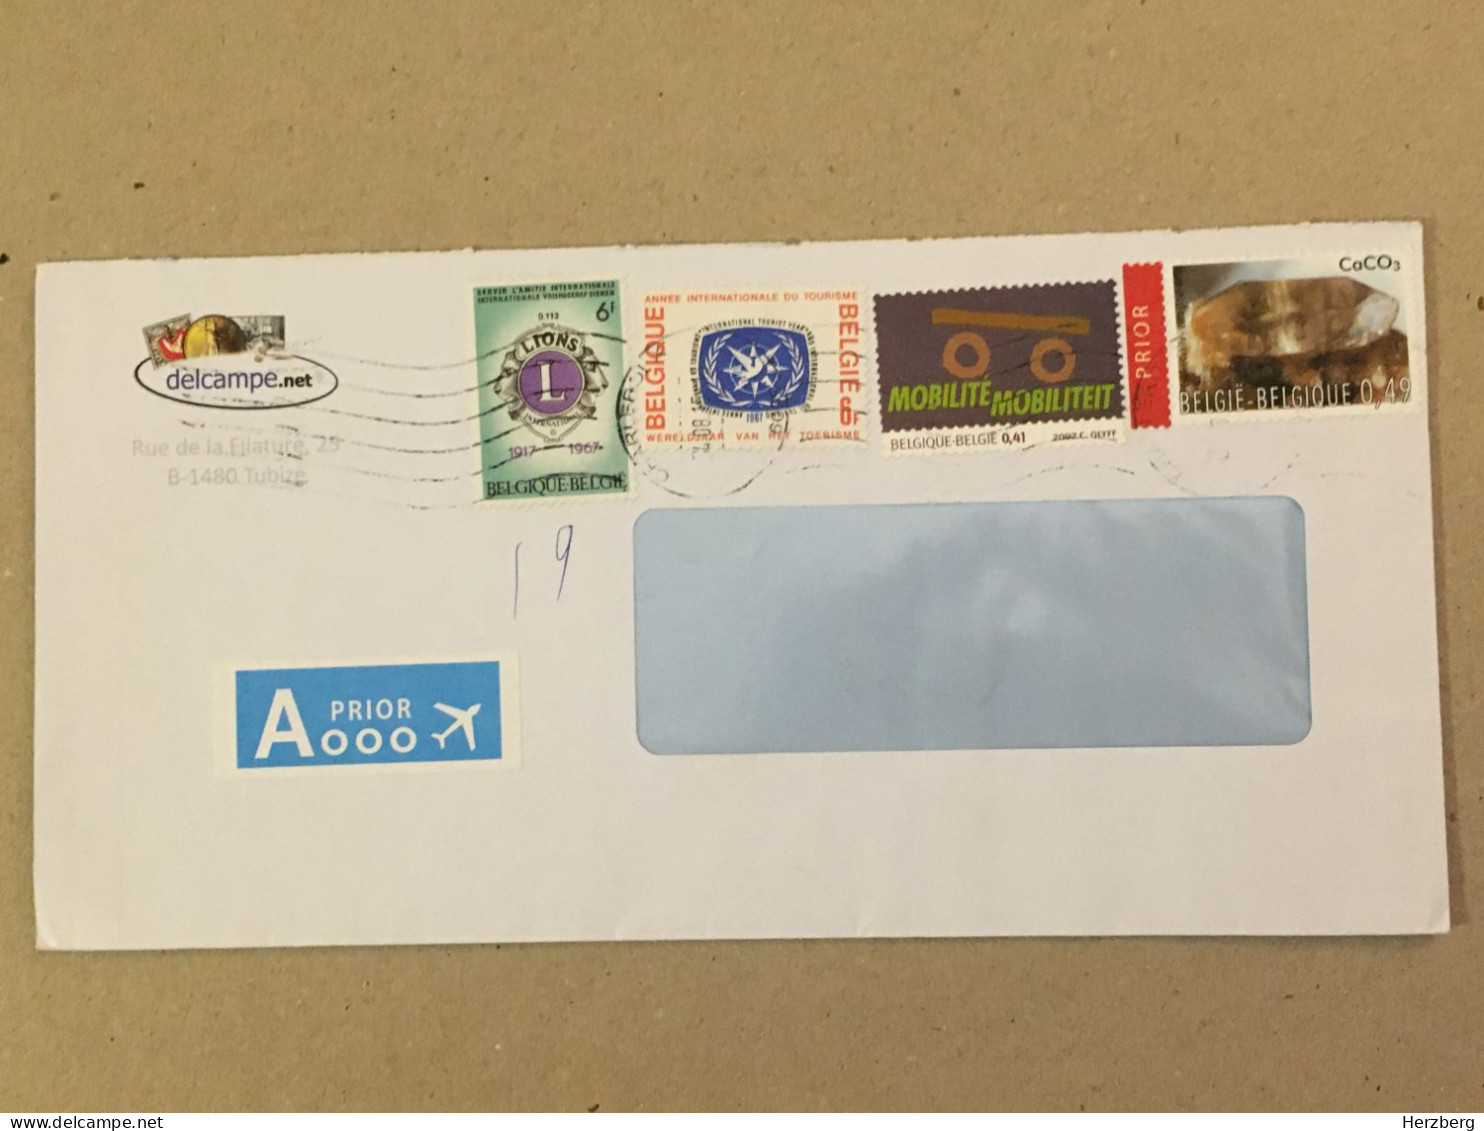 Belgie Belgique Used Letter Stamp On Cover Priority Lions Club International Tourist Year 1967 Calcium Carbonate 2015 - 2013-... Koning Filip